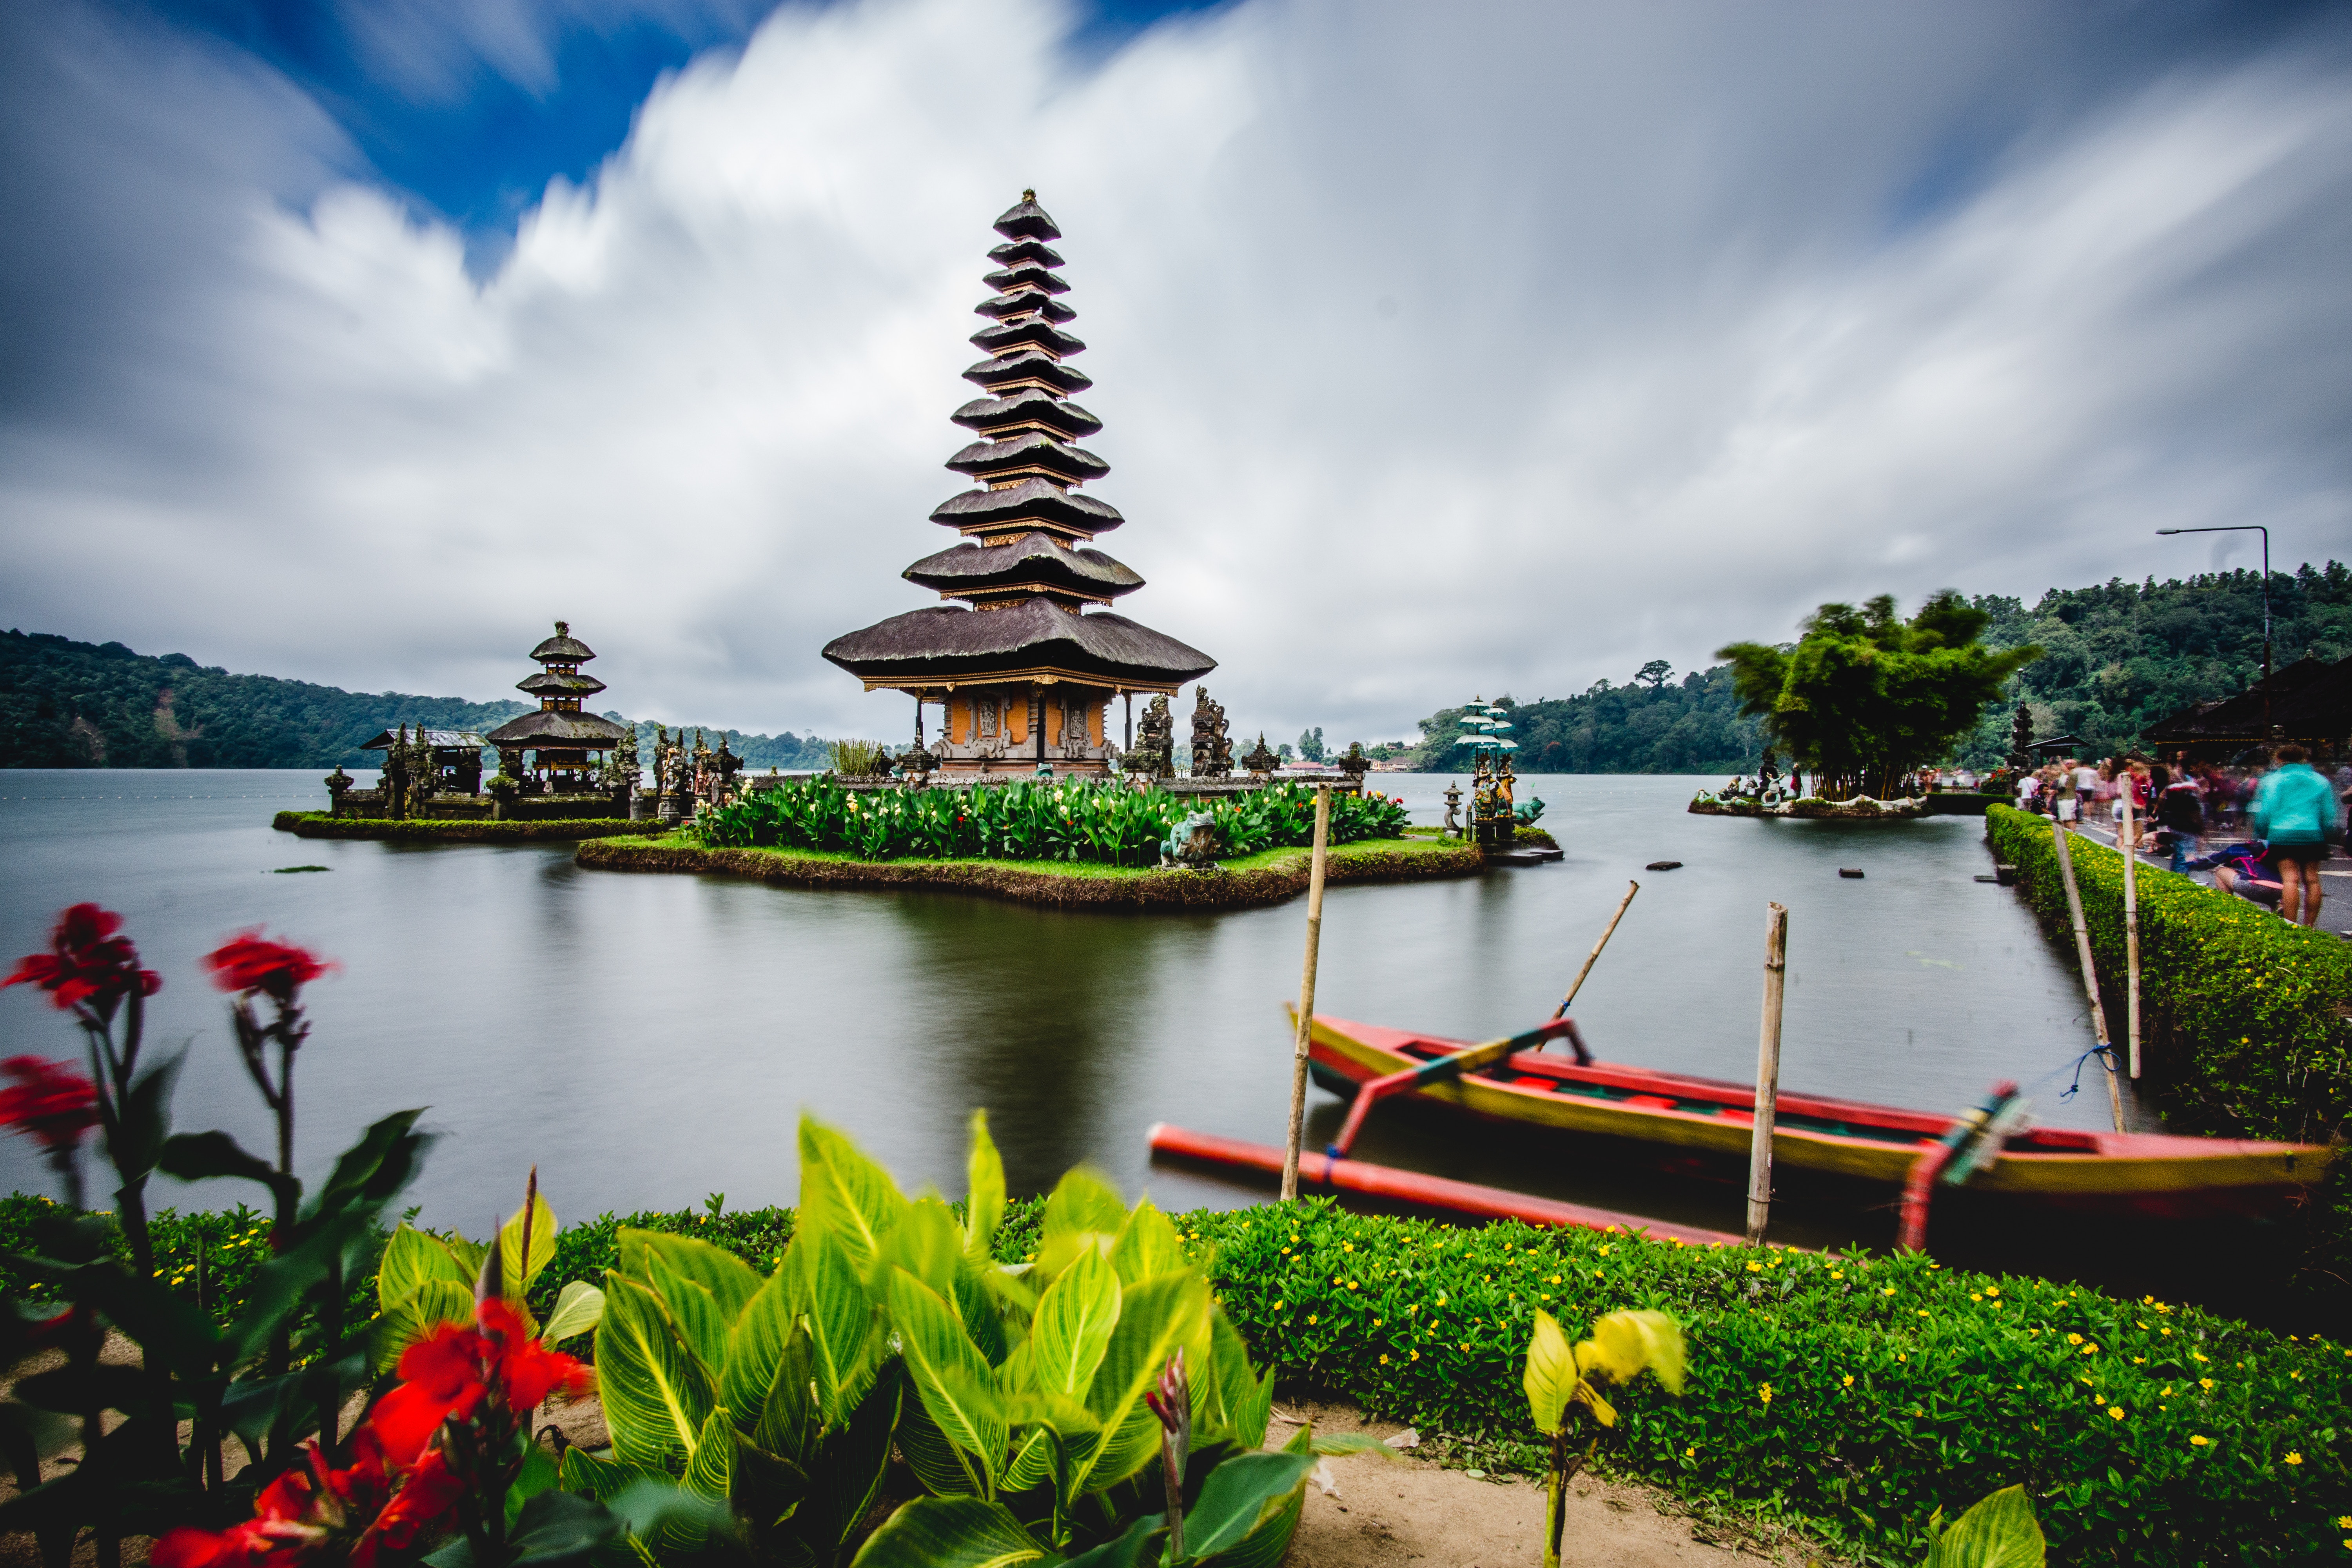 Where to stay in Bali Indonesia - Sit back and Relax or Party hard!